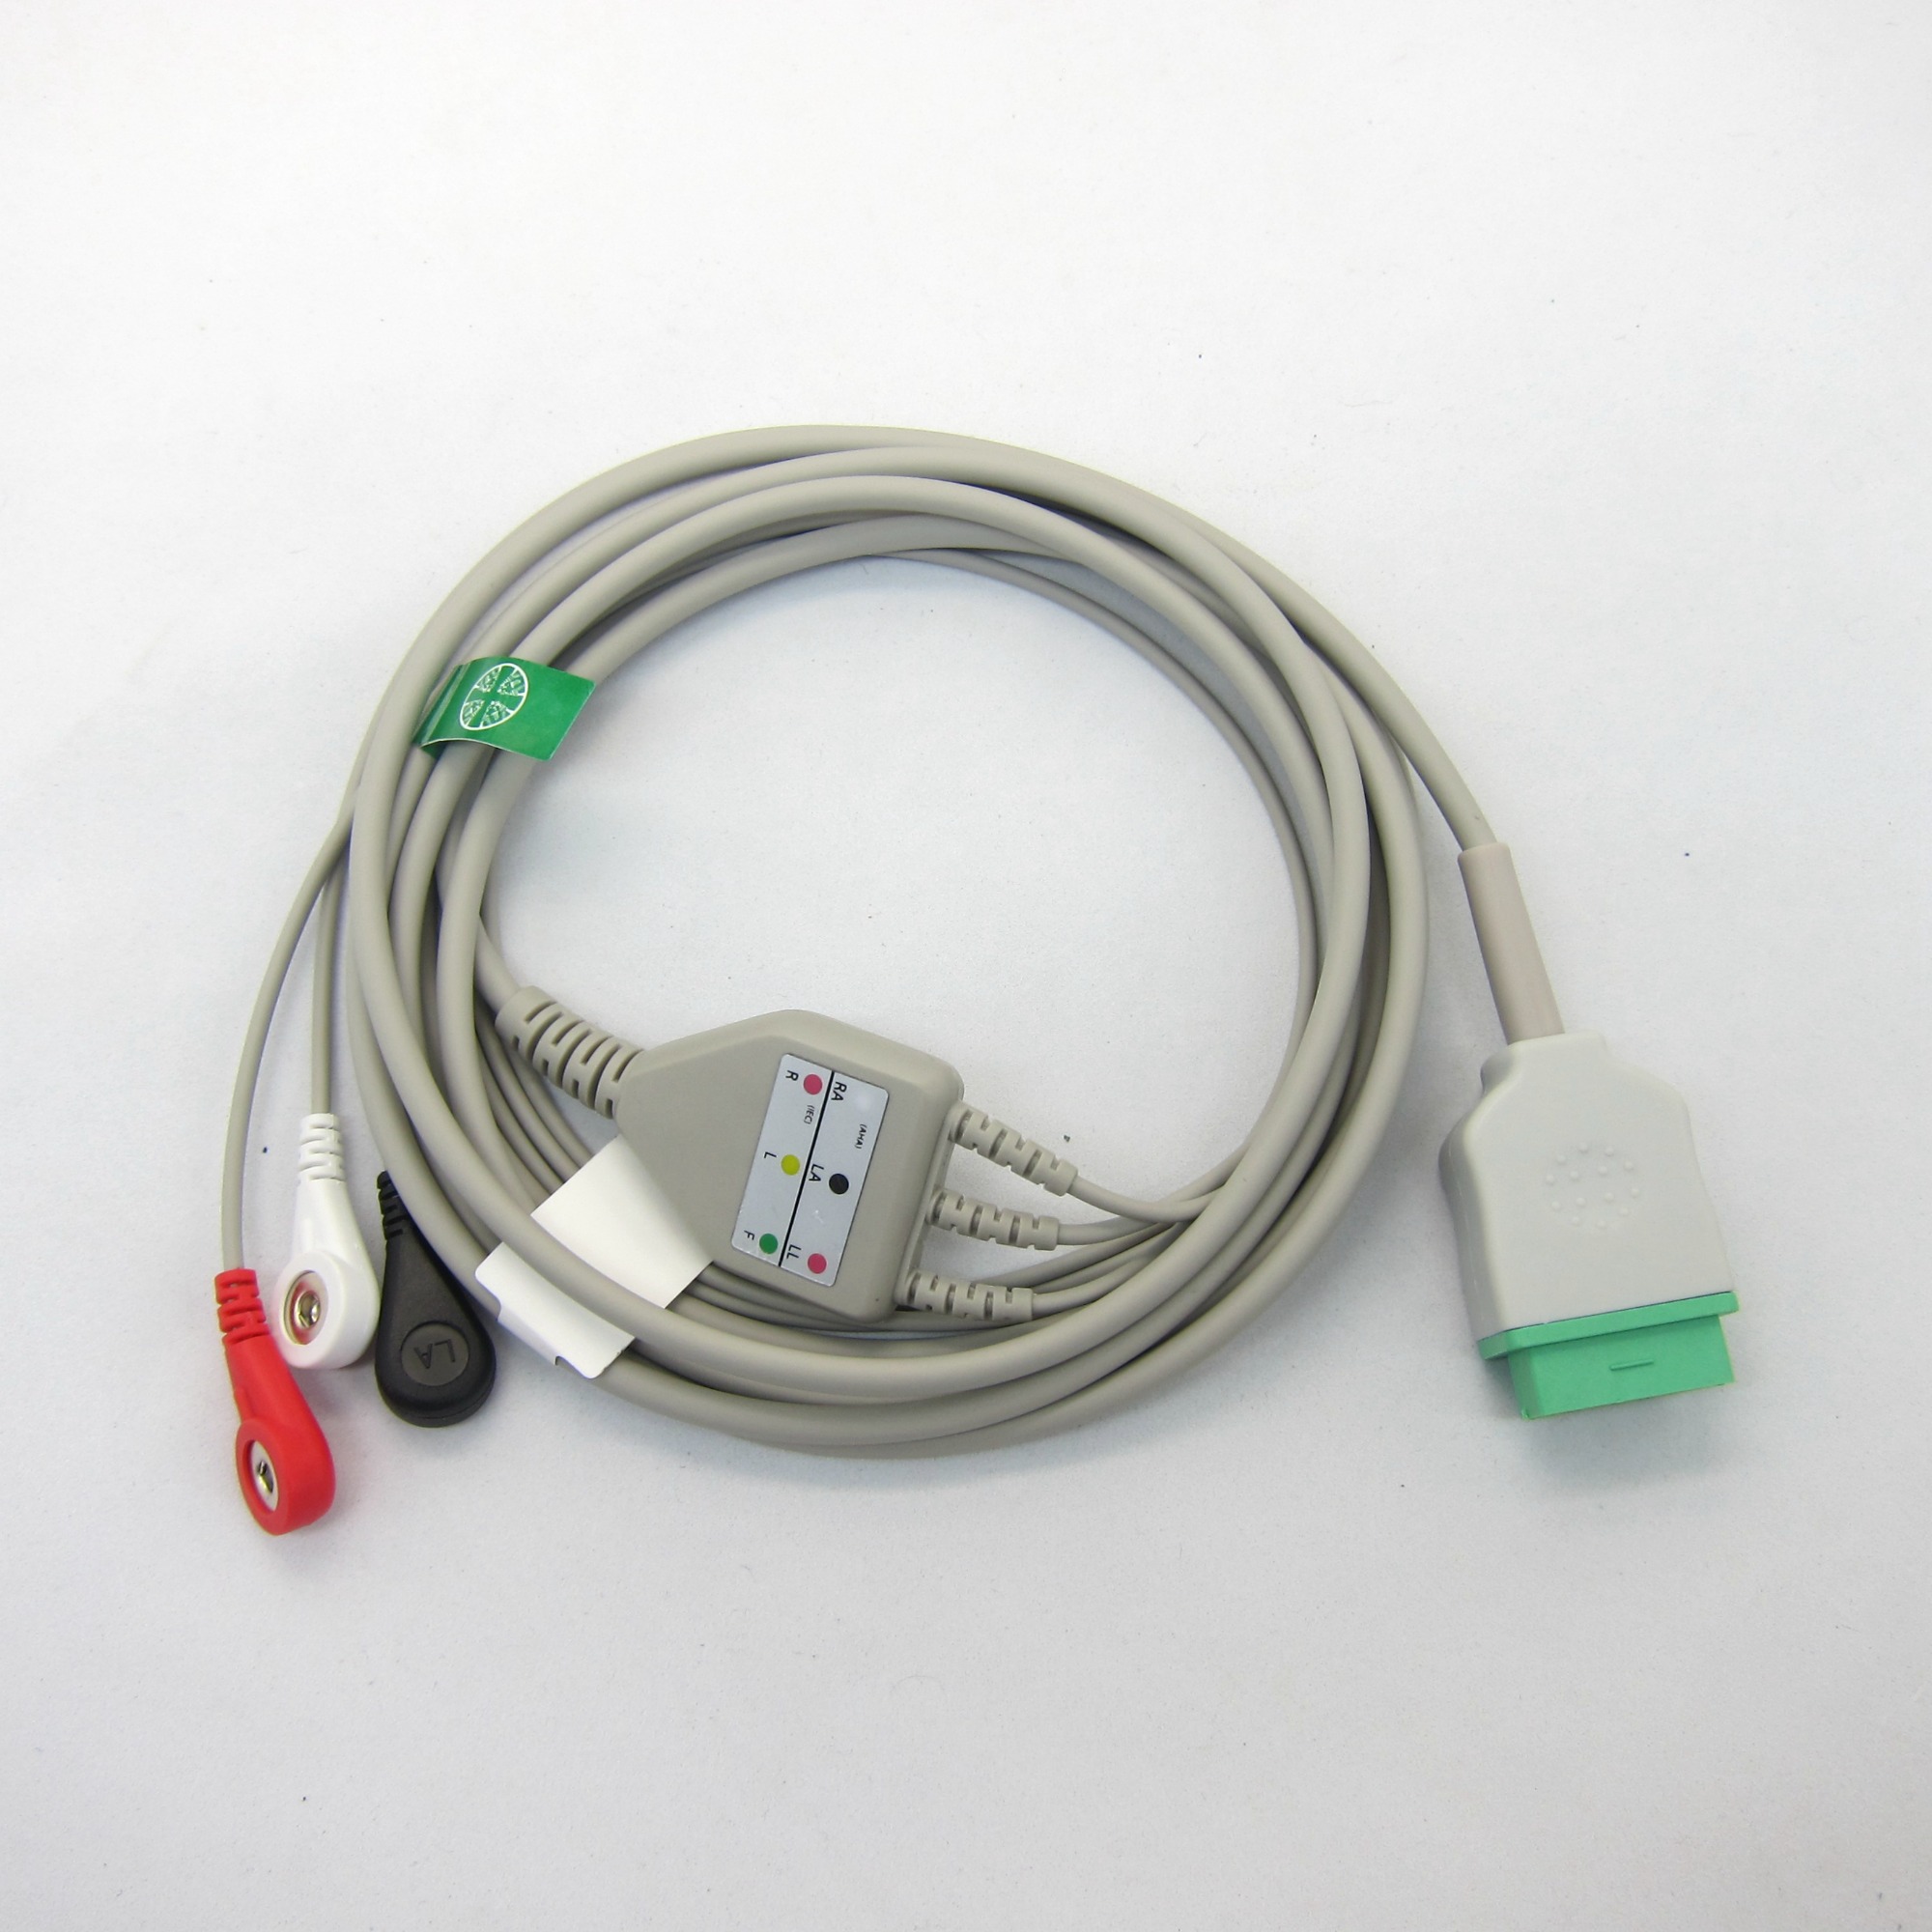 GE DASH SOLAR PRO One-piece 3 or 5 Leads Snap Or Clip ECG cable and leadwires for ECG machine